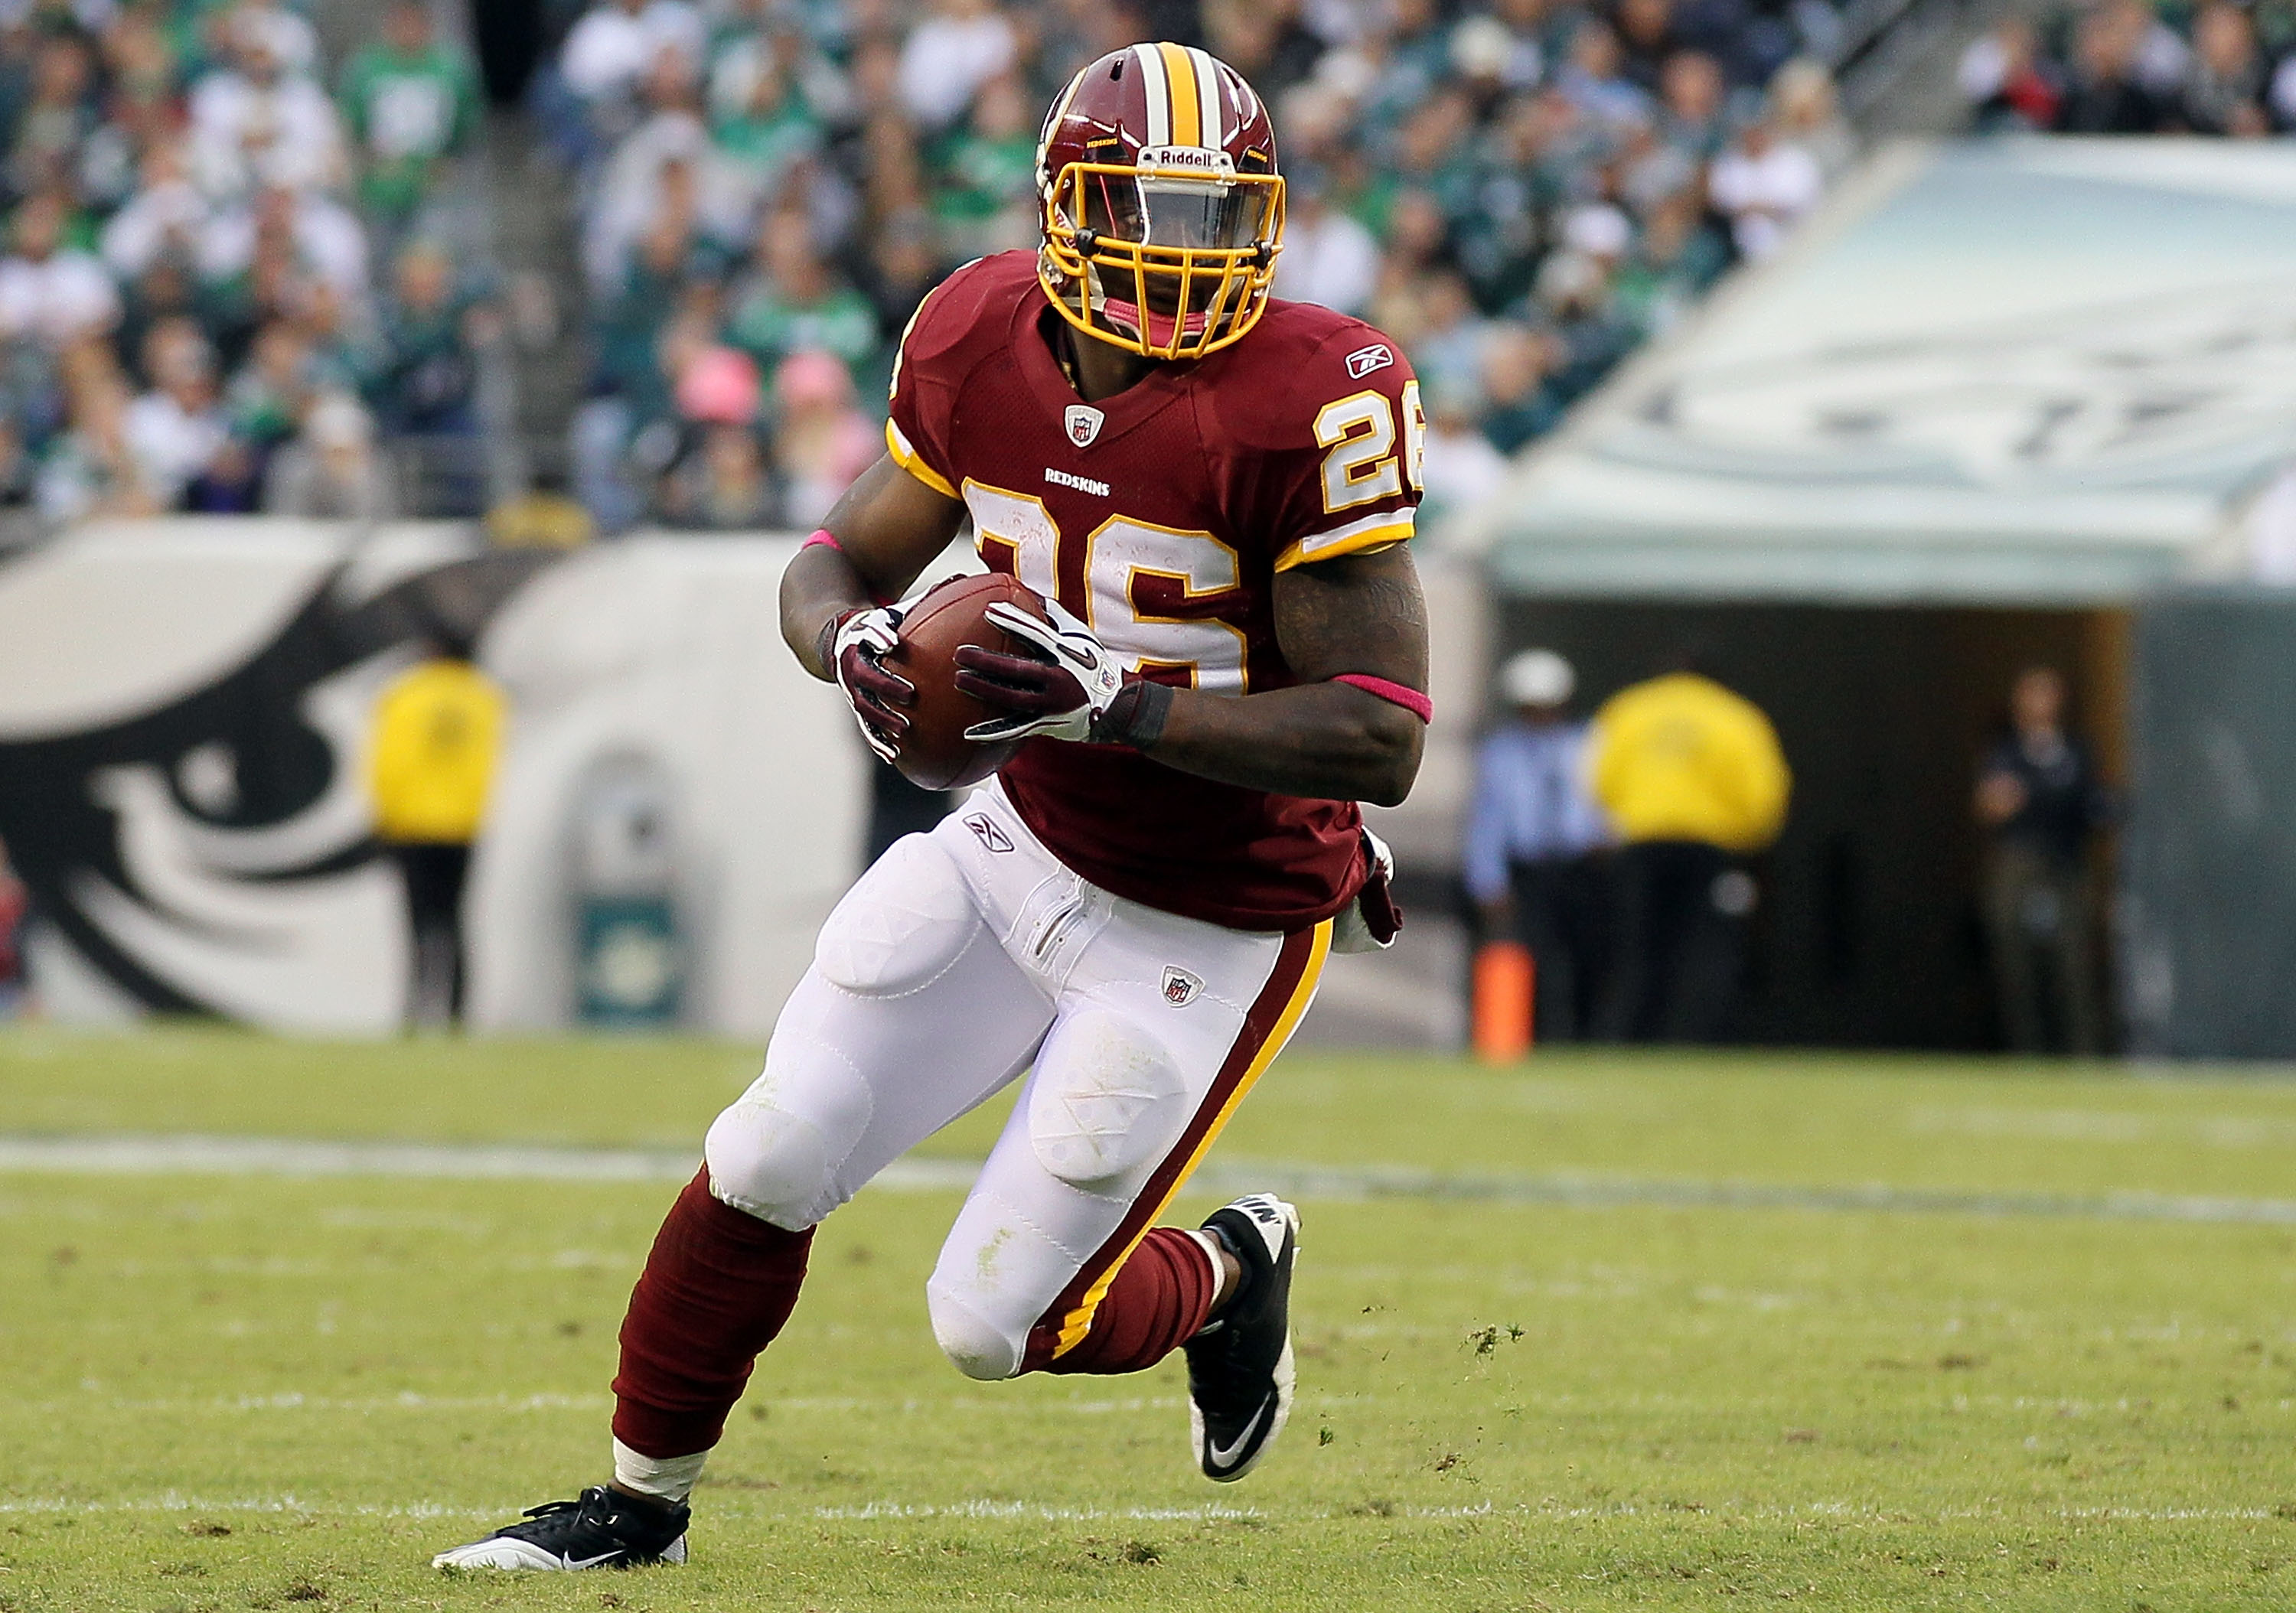 PHILADELPHIA - OCTOBER 03:  Clinton Portis #26 of the Washington Redskins runs the ball against the Philadelphia Eagles on October 3, 2010 at Lincoln Financial Field in Philadelphia, Pennsylvania.  (Photo by Jim McIsaac/Getty Images)